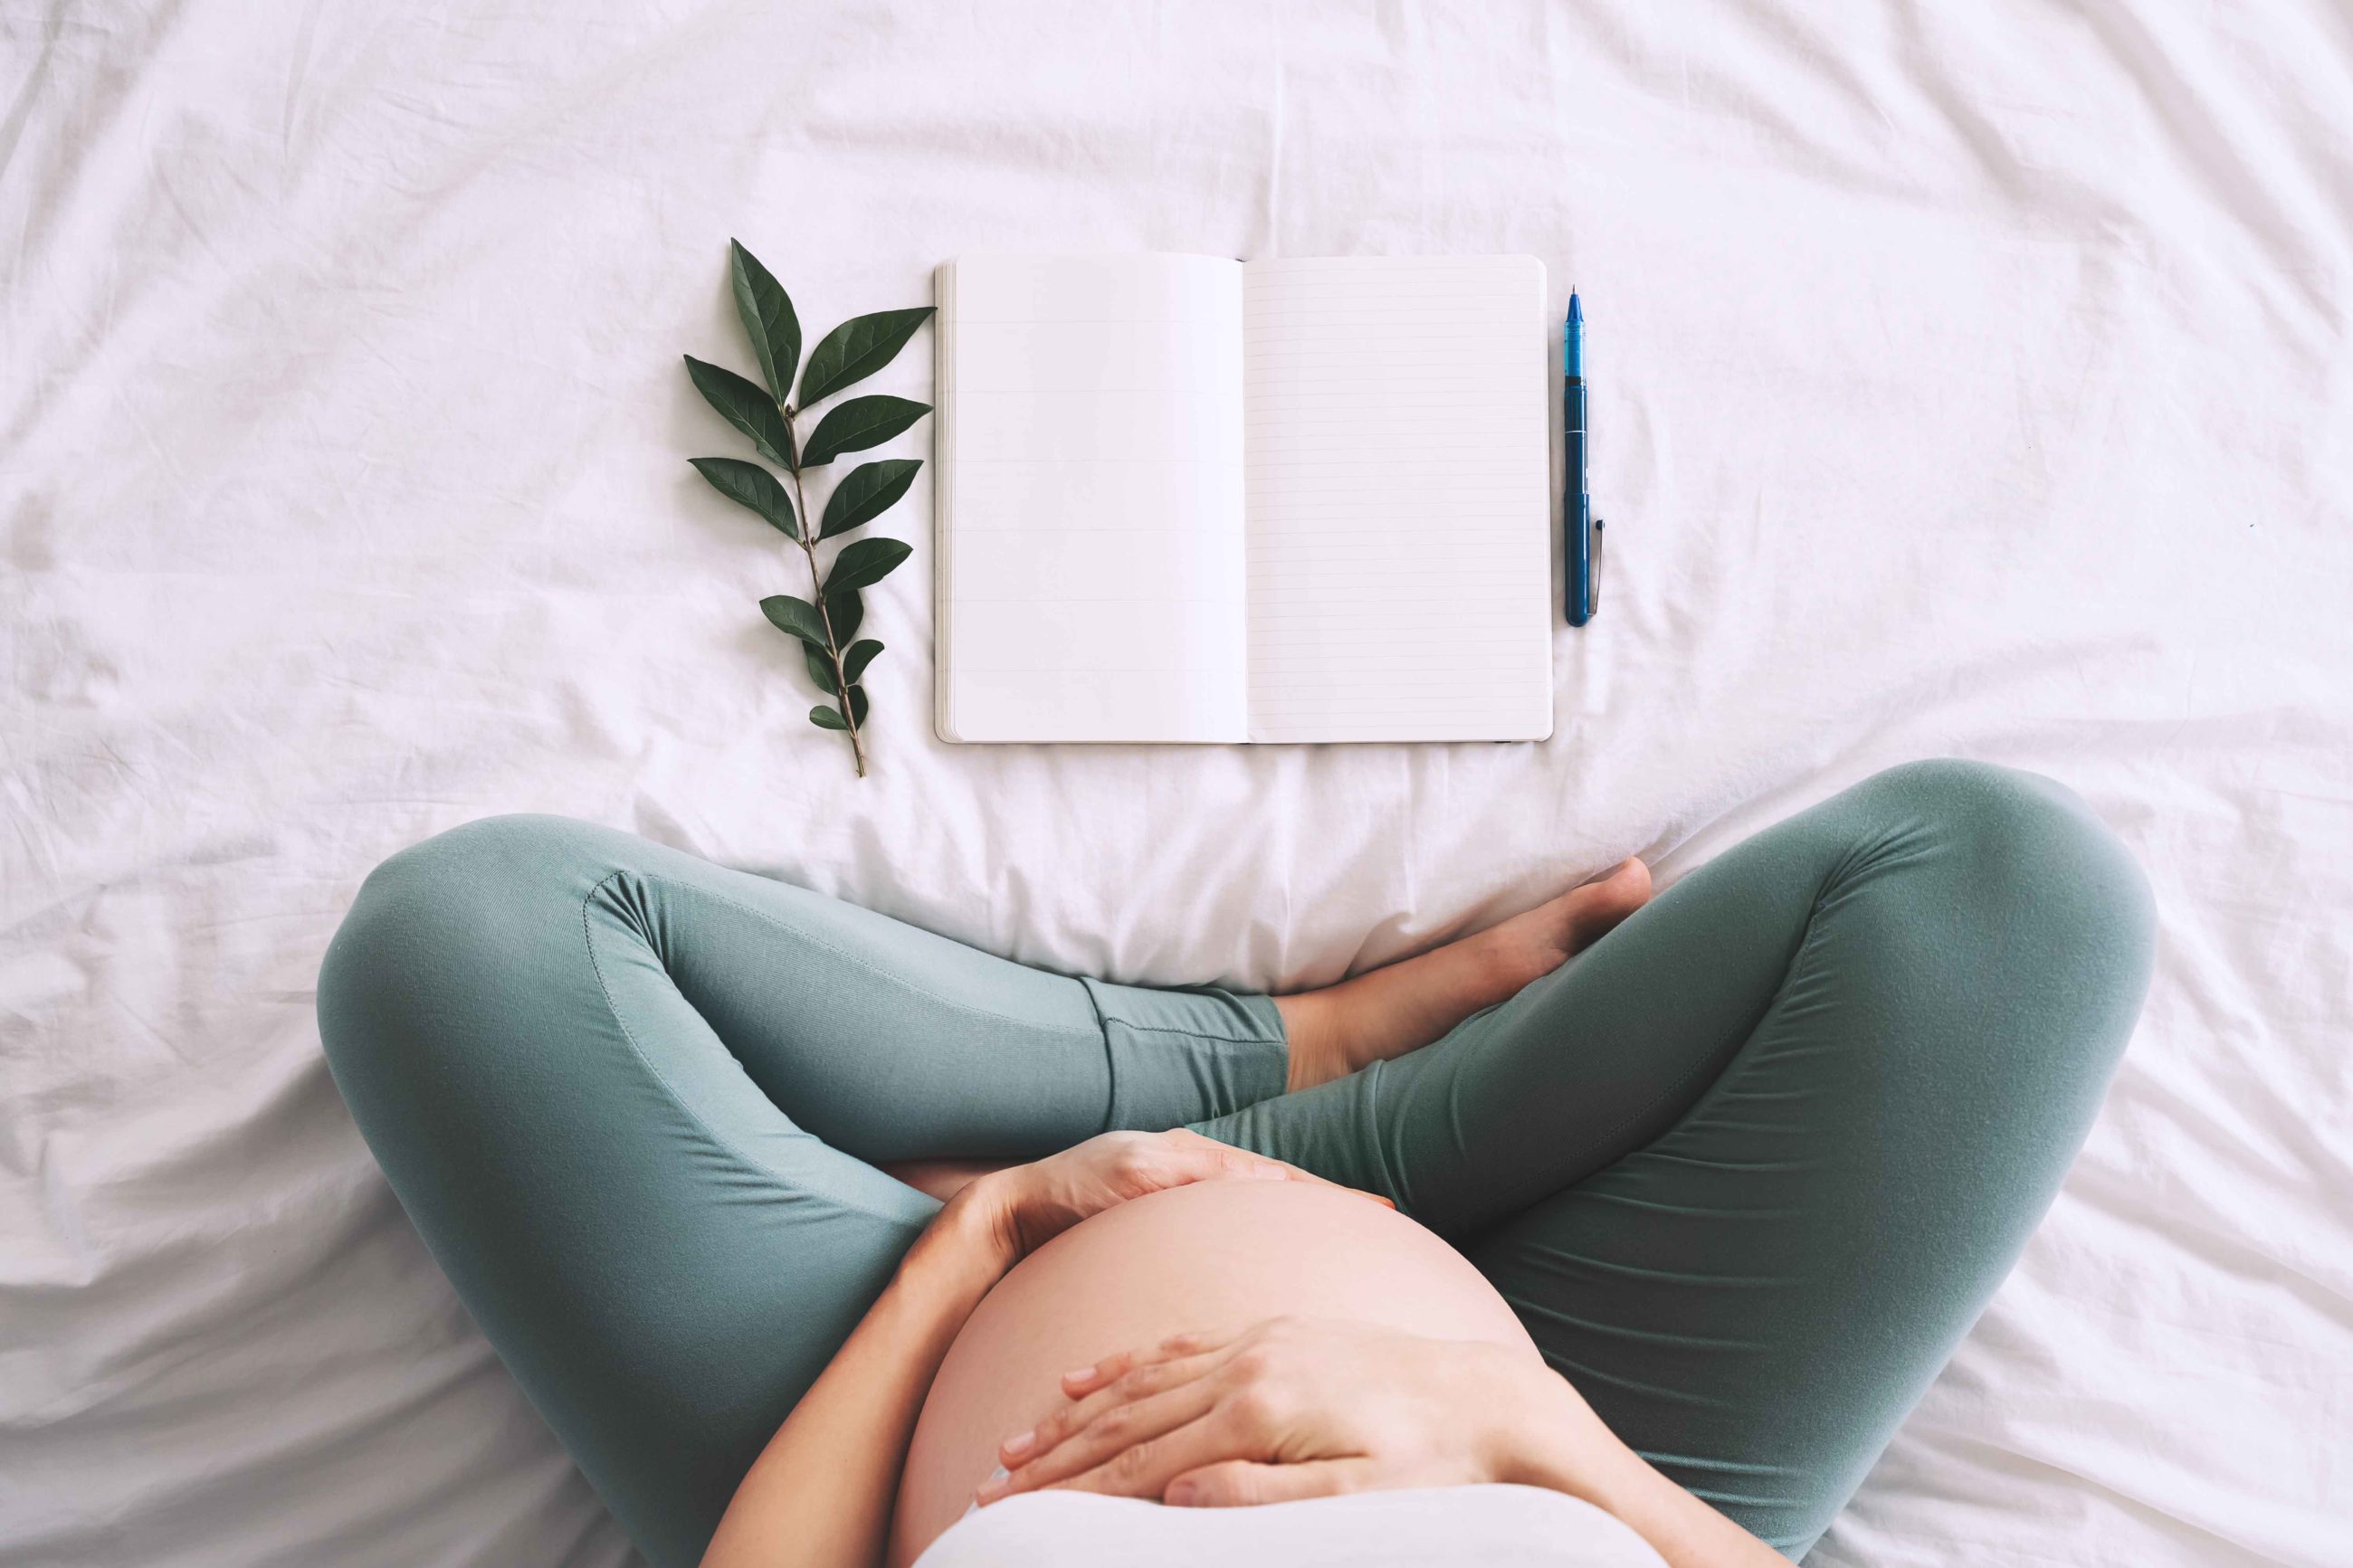 Pregnant woman sitting cross-legged on a bed